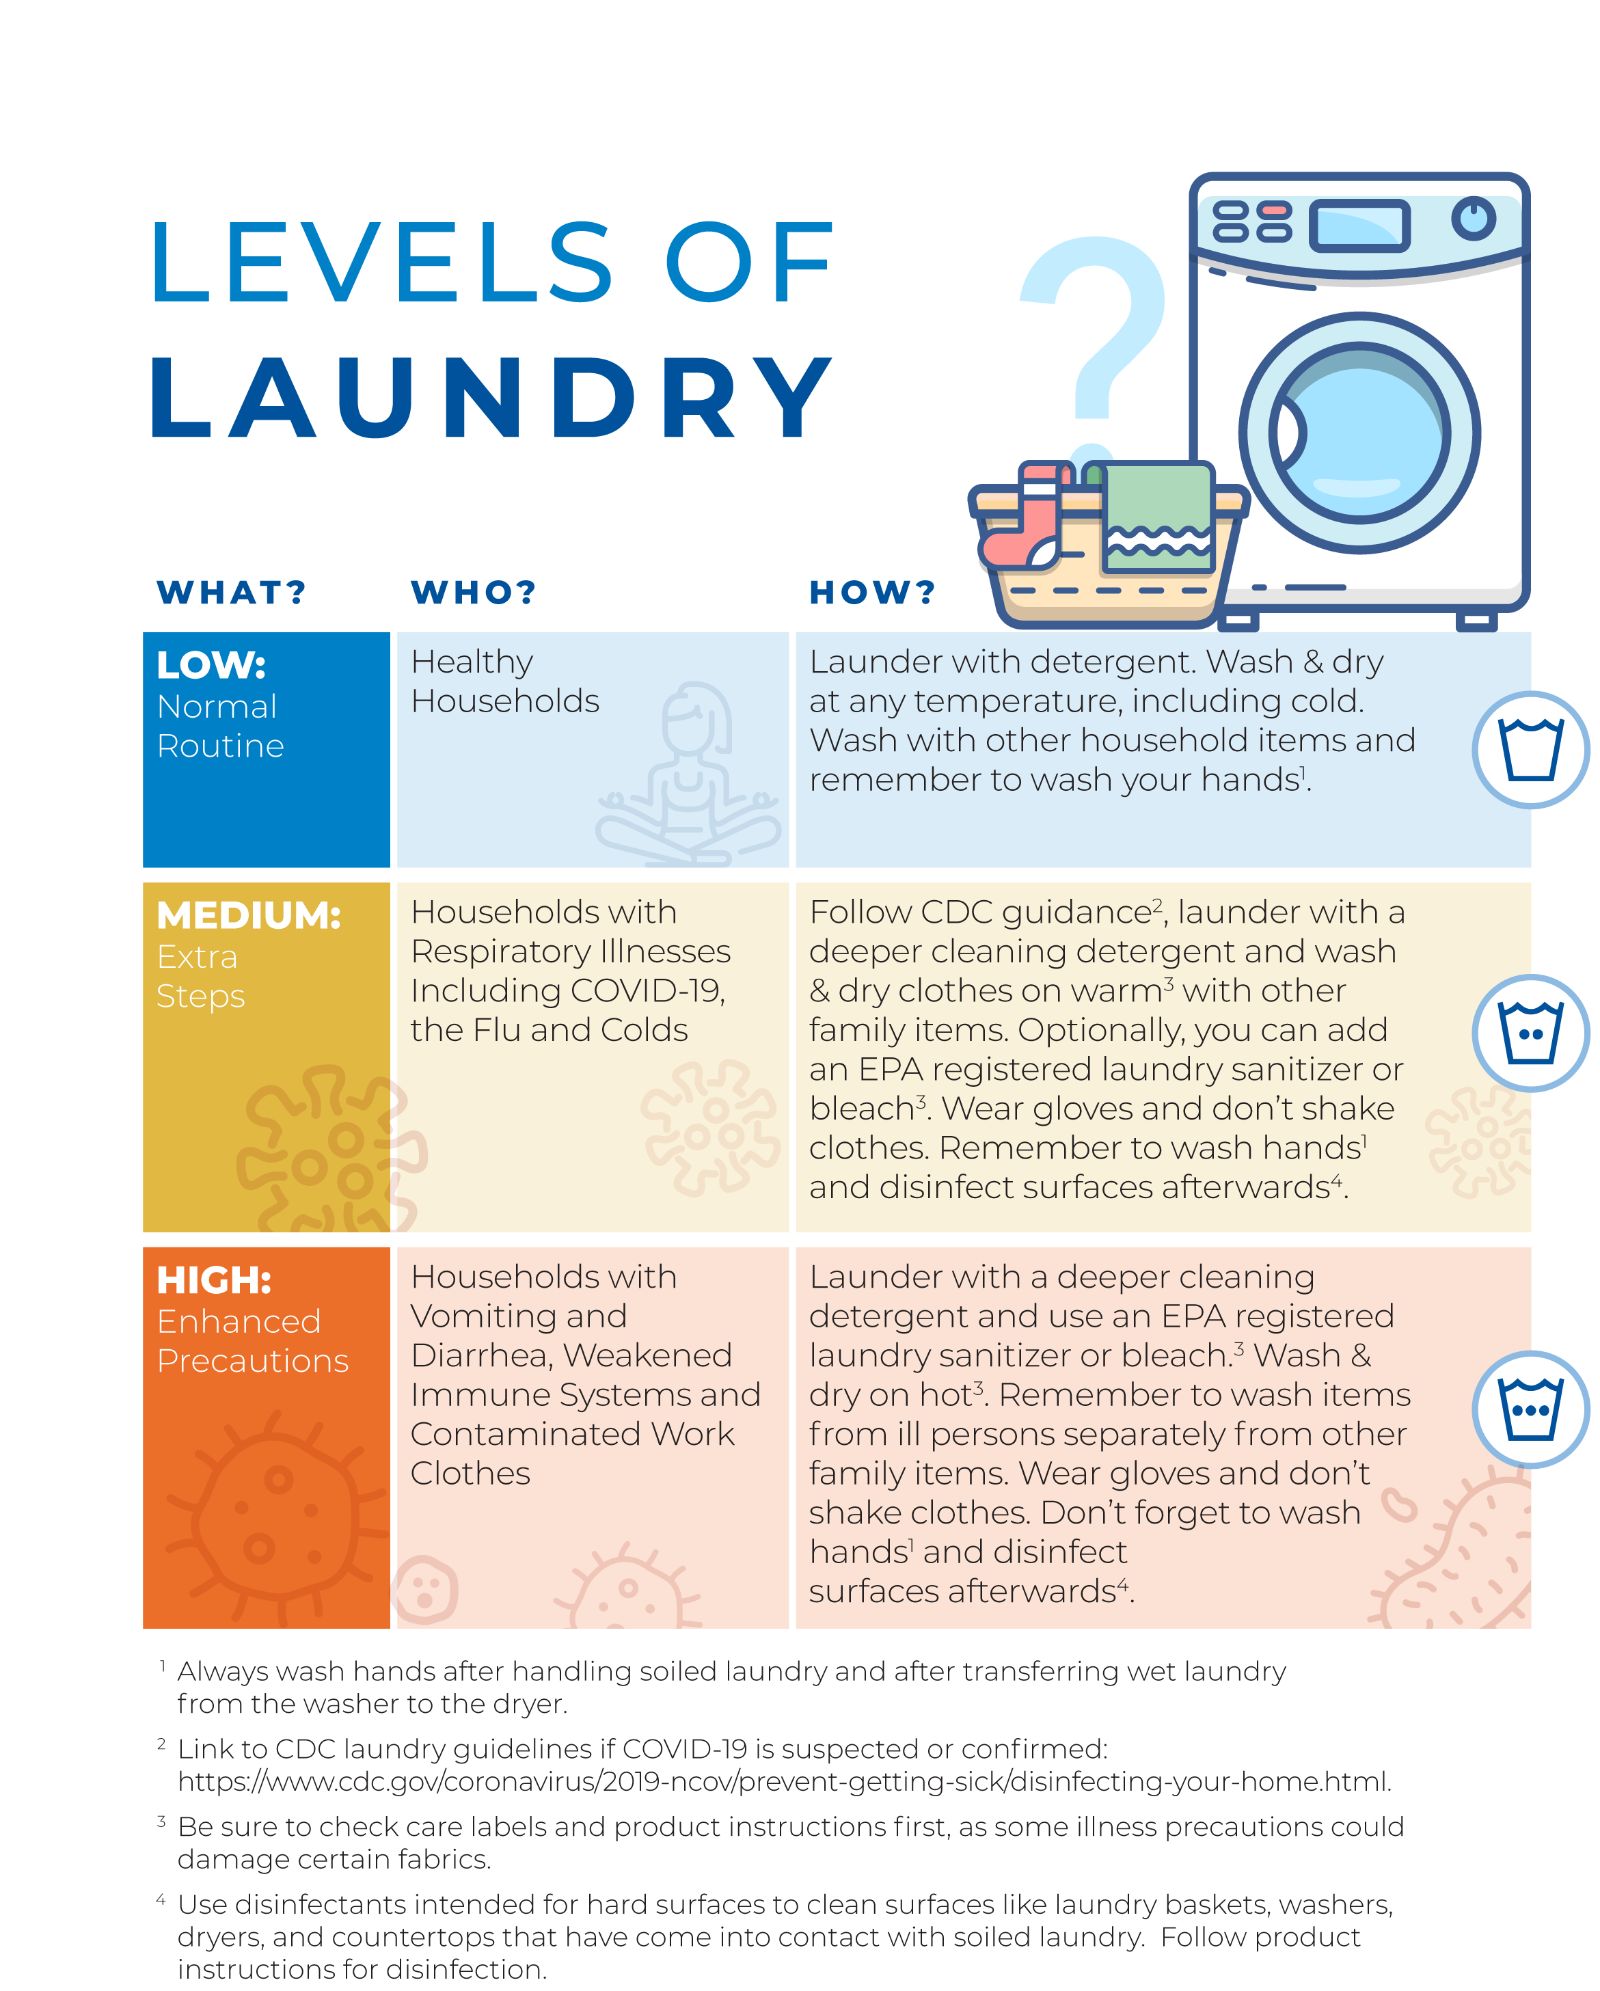 https://www.cleaninginstitute.org/sites/default/files/pictures/cleaning-tips/LaundryLevels.jpg